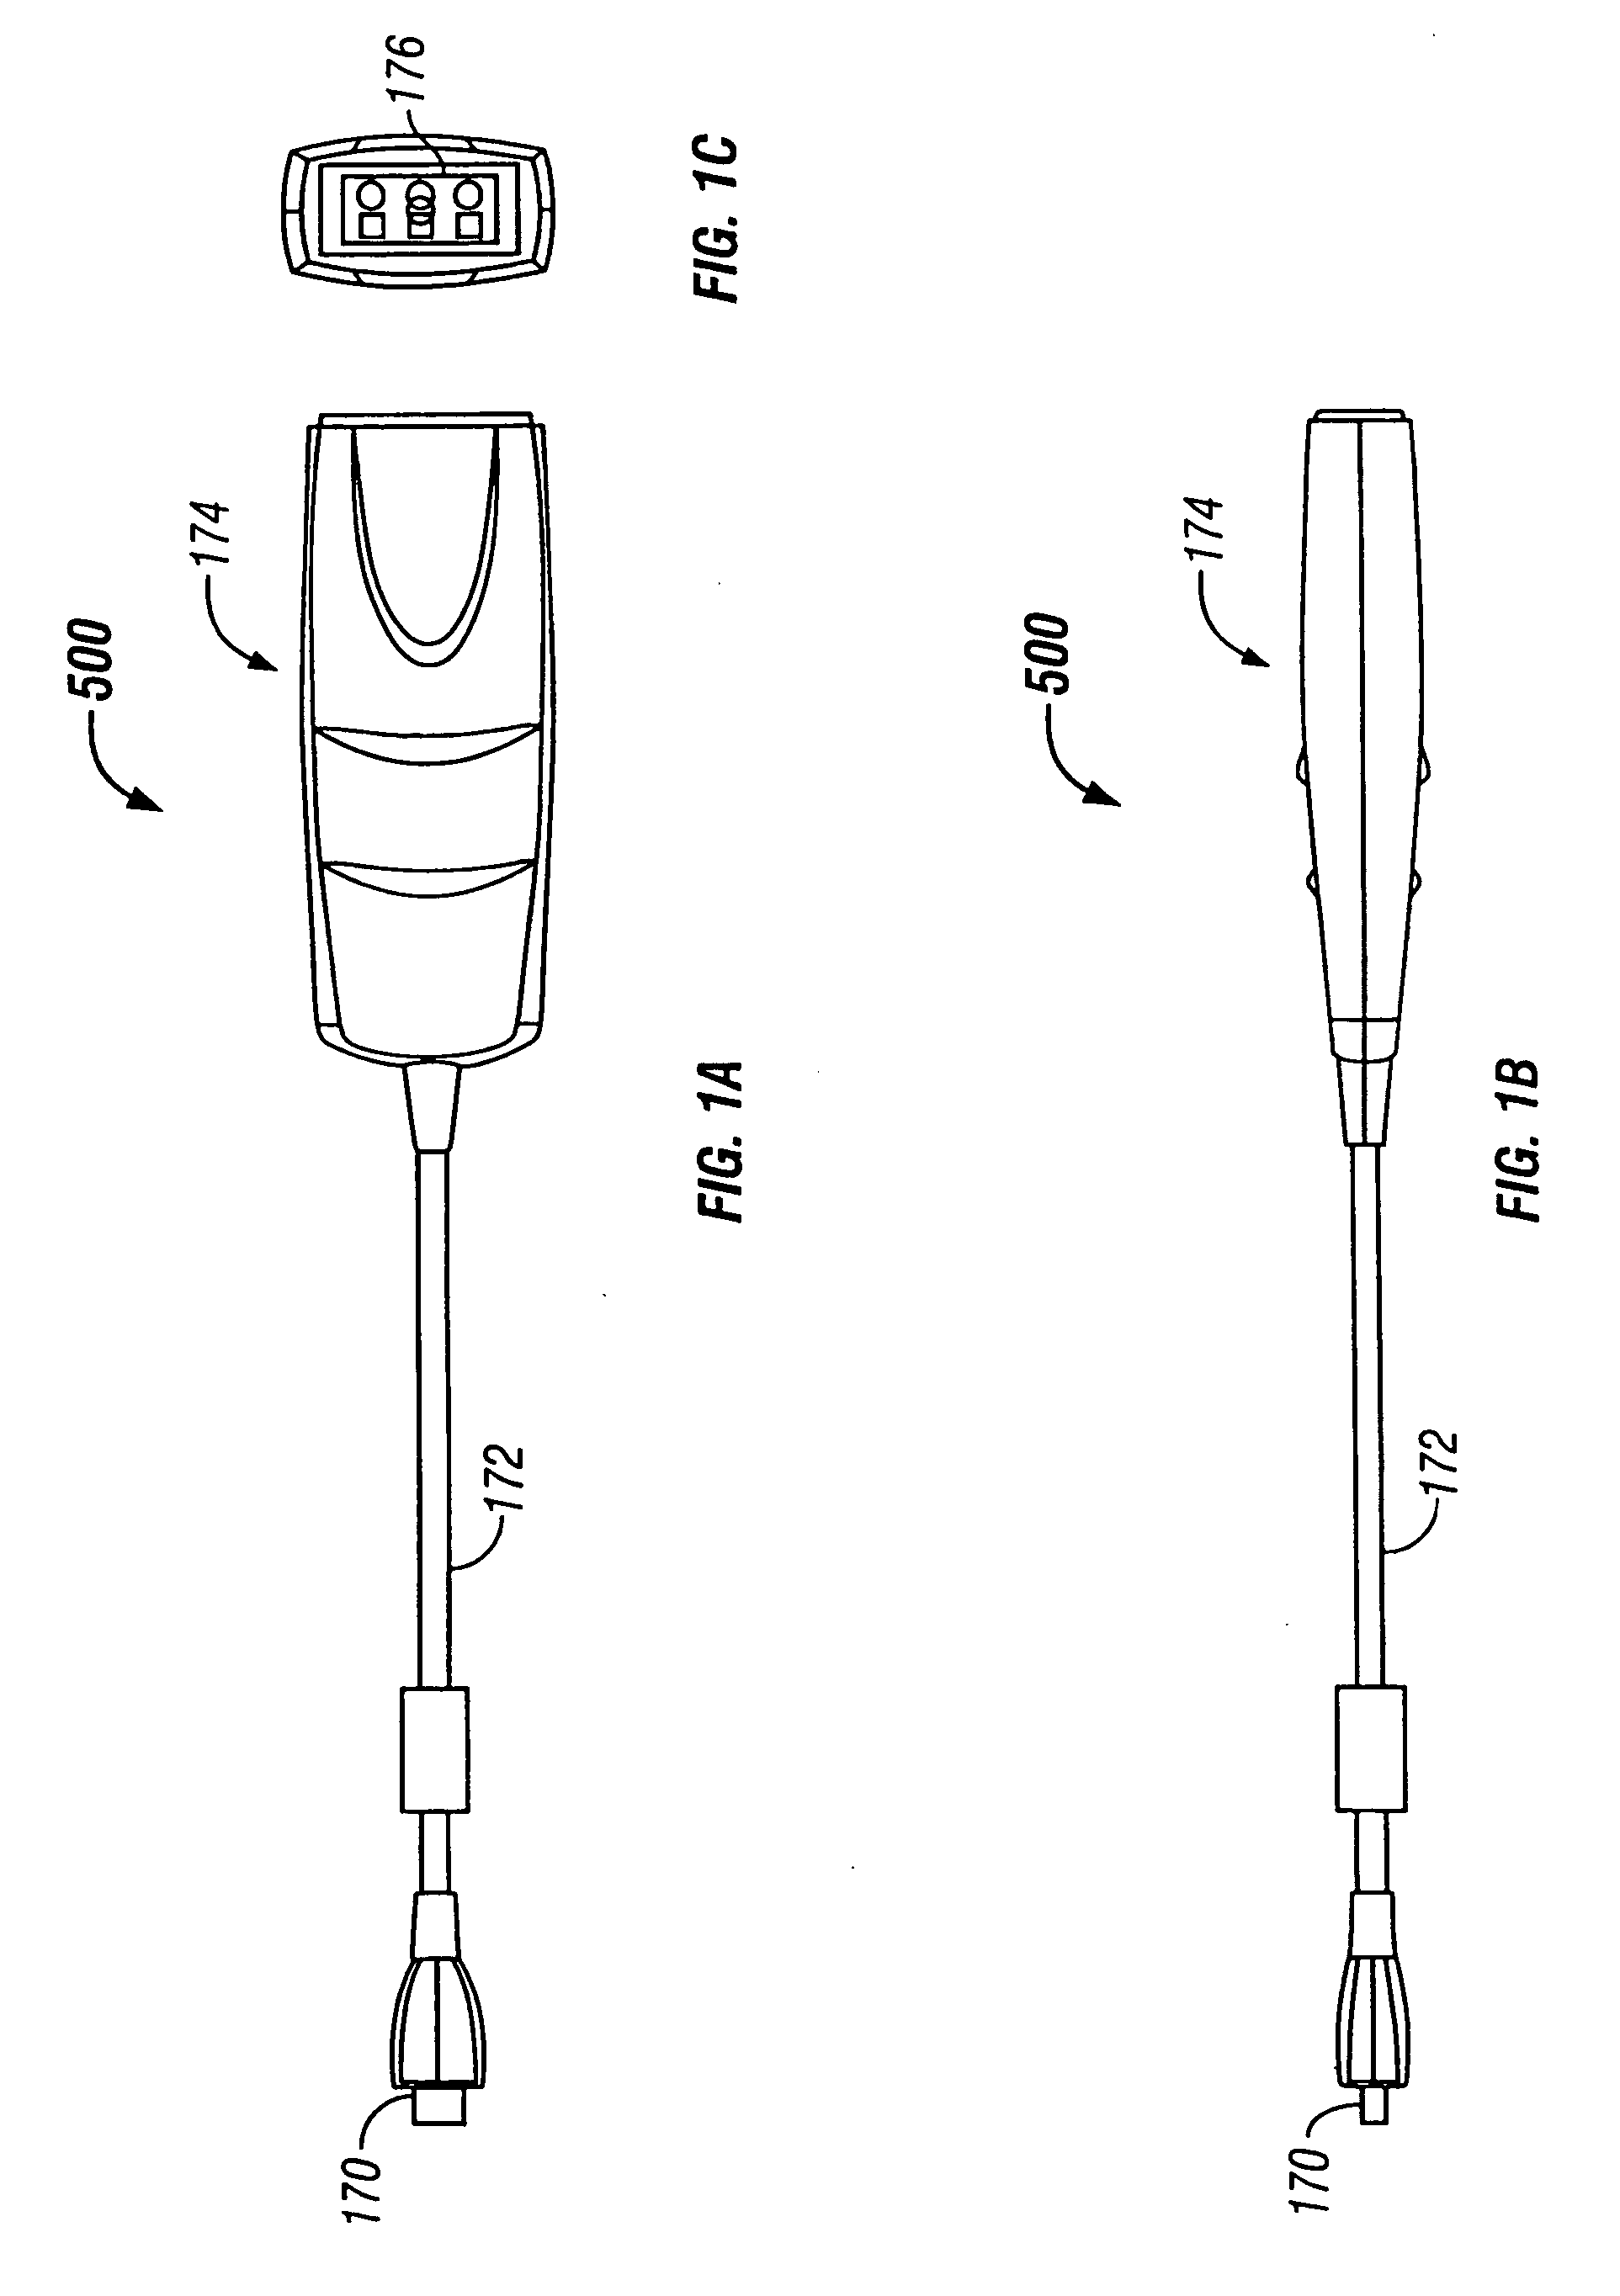 Medical diagnostic ultrasound instrument with ECG module, authorization mechanism and methods of use